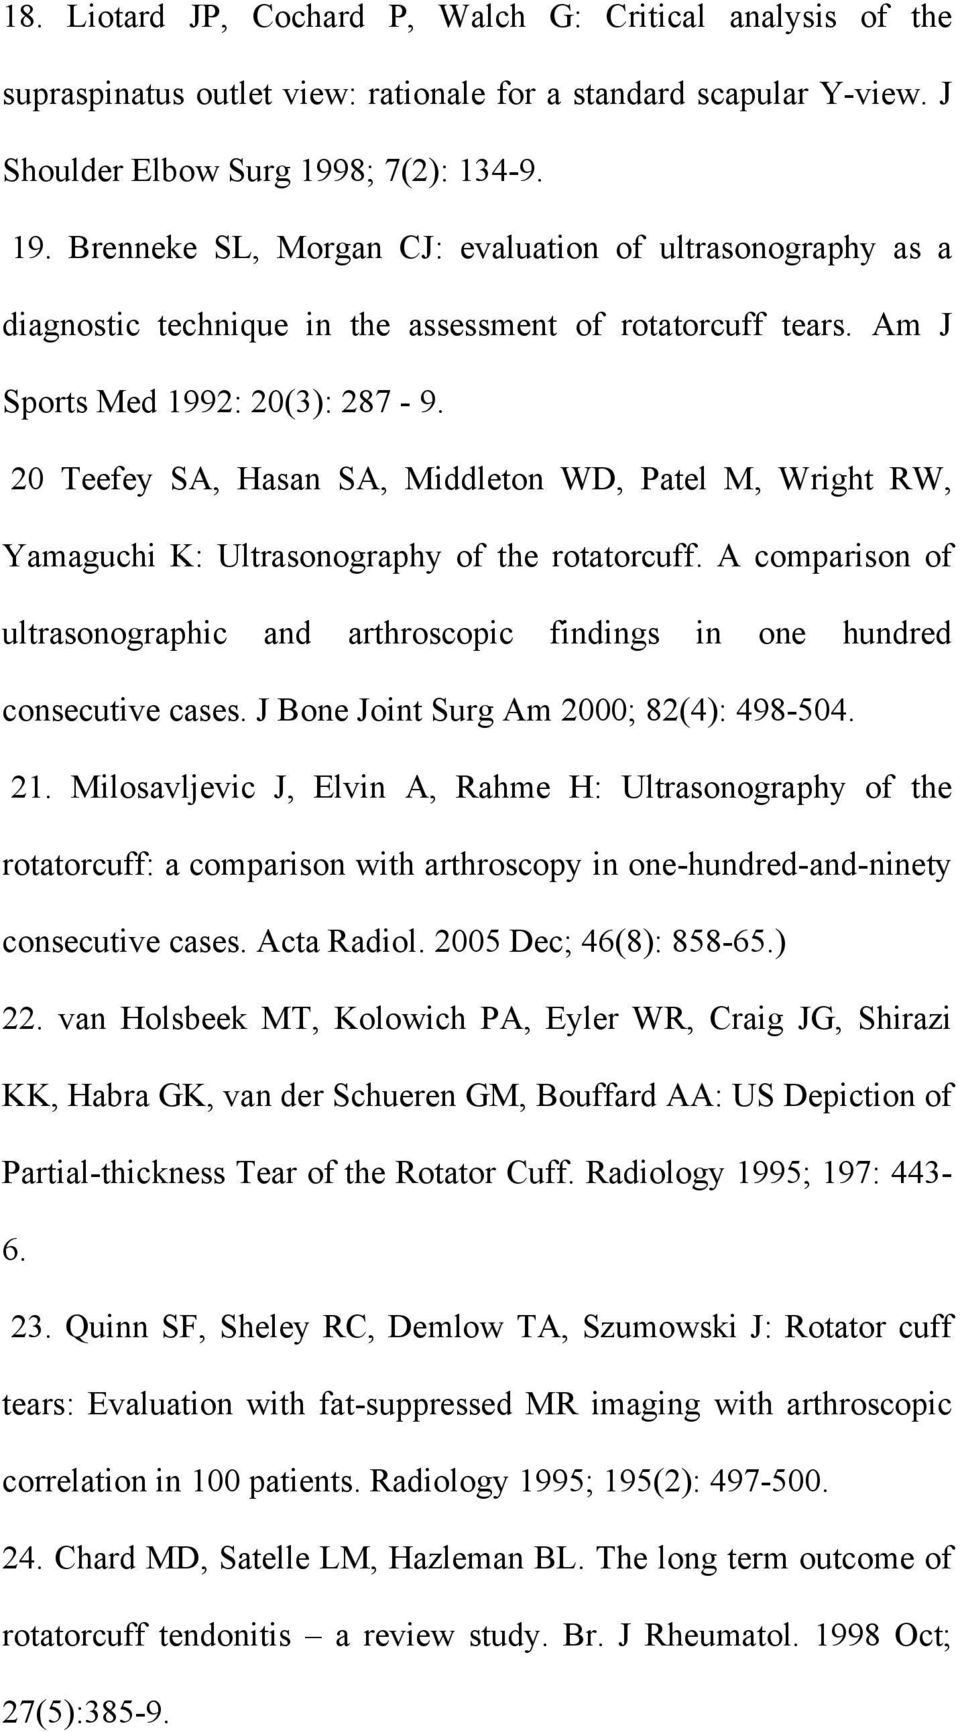 20 Teefey SA, Hasan SA, Middleton WD, Patel M, Wright RW, Yamaguchi K: Ultrasonography of the rotatorcuff. A comparison of ultrasonographic and arthroscopic findings in one hundred consecutive cases.